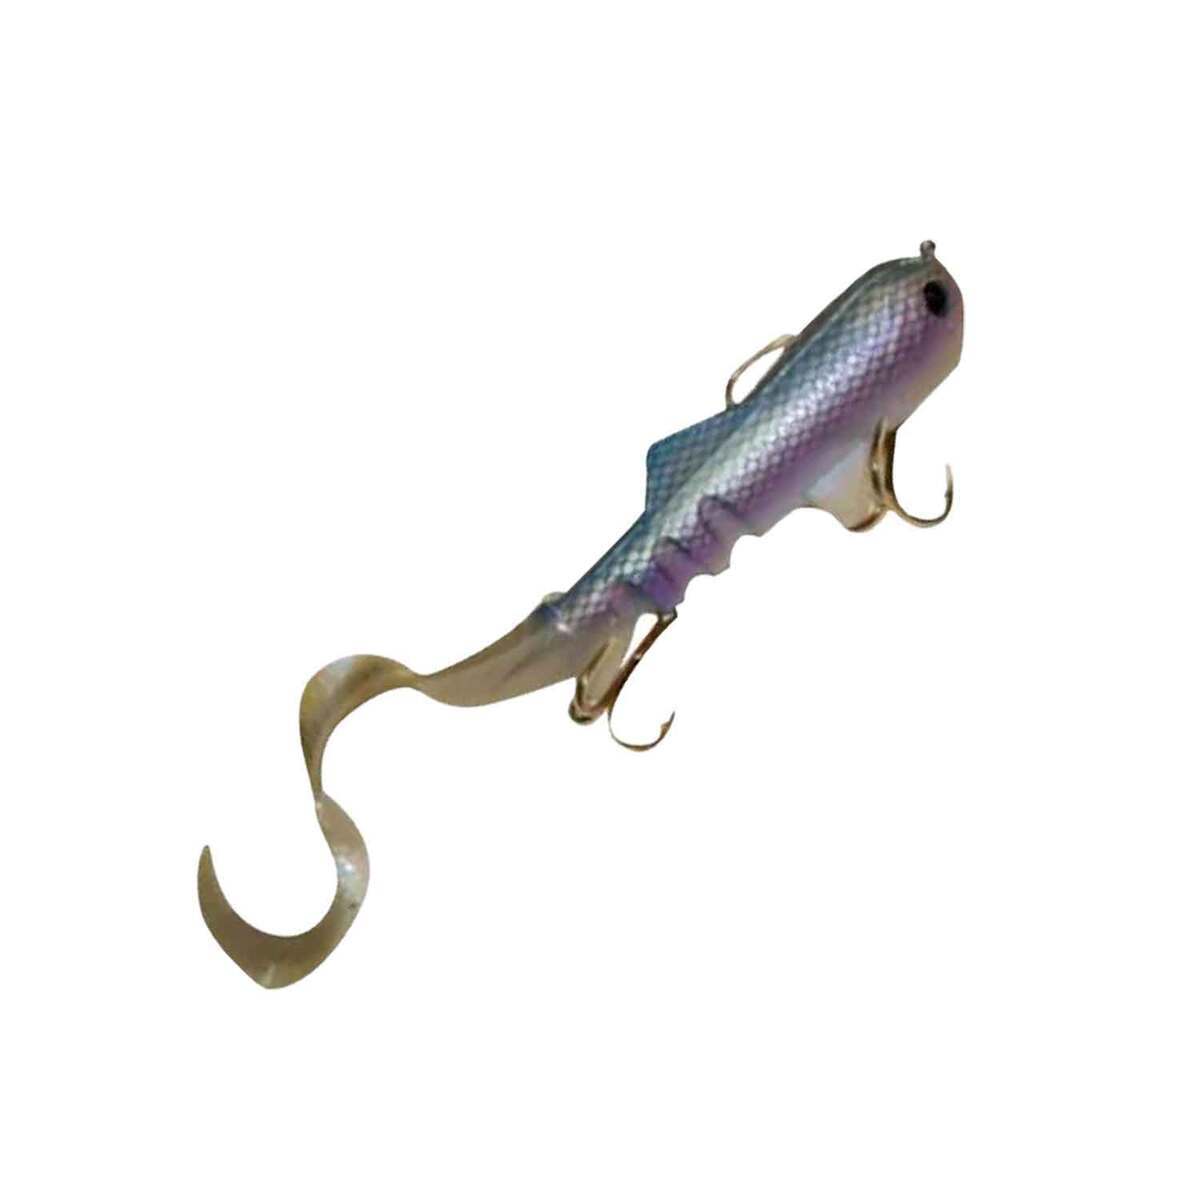 4in 5 Pack Custom Scented Split Tail Minnows – Sassy Bass – Lure